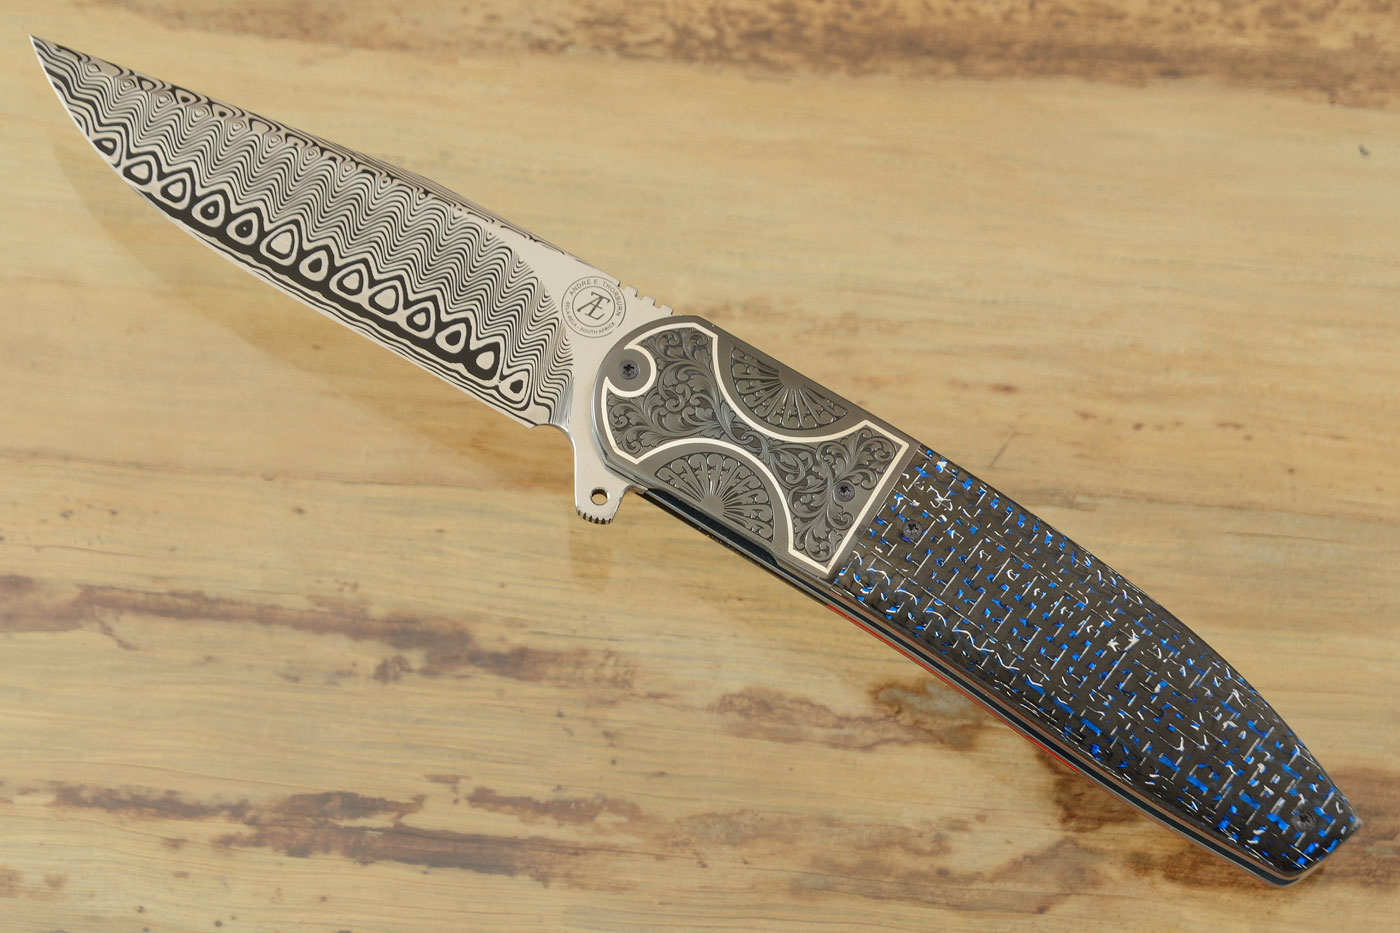 L28M Flipper with Damasteel, Blue/Silver Carbon Fiber, and Engraved Zirconium with Silver Inlay (Ceramic IKBS)